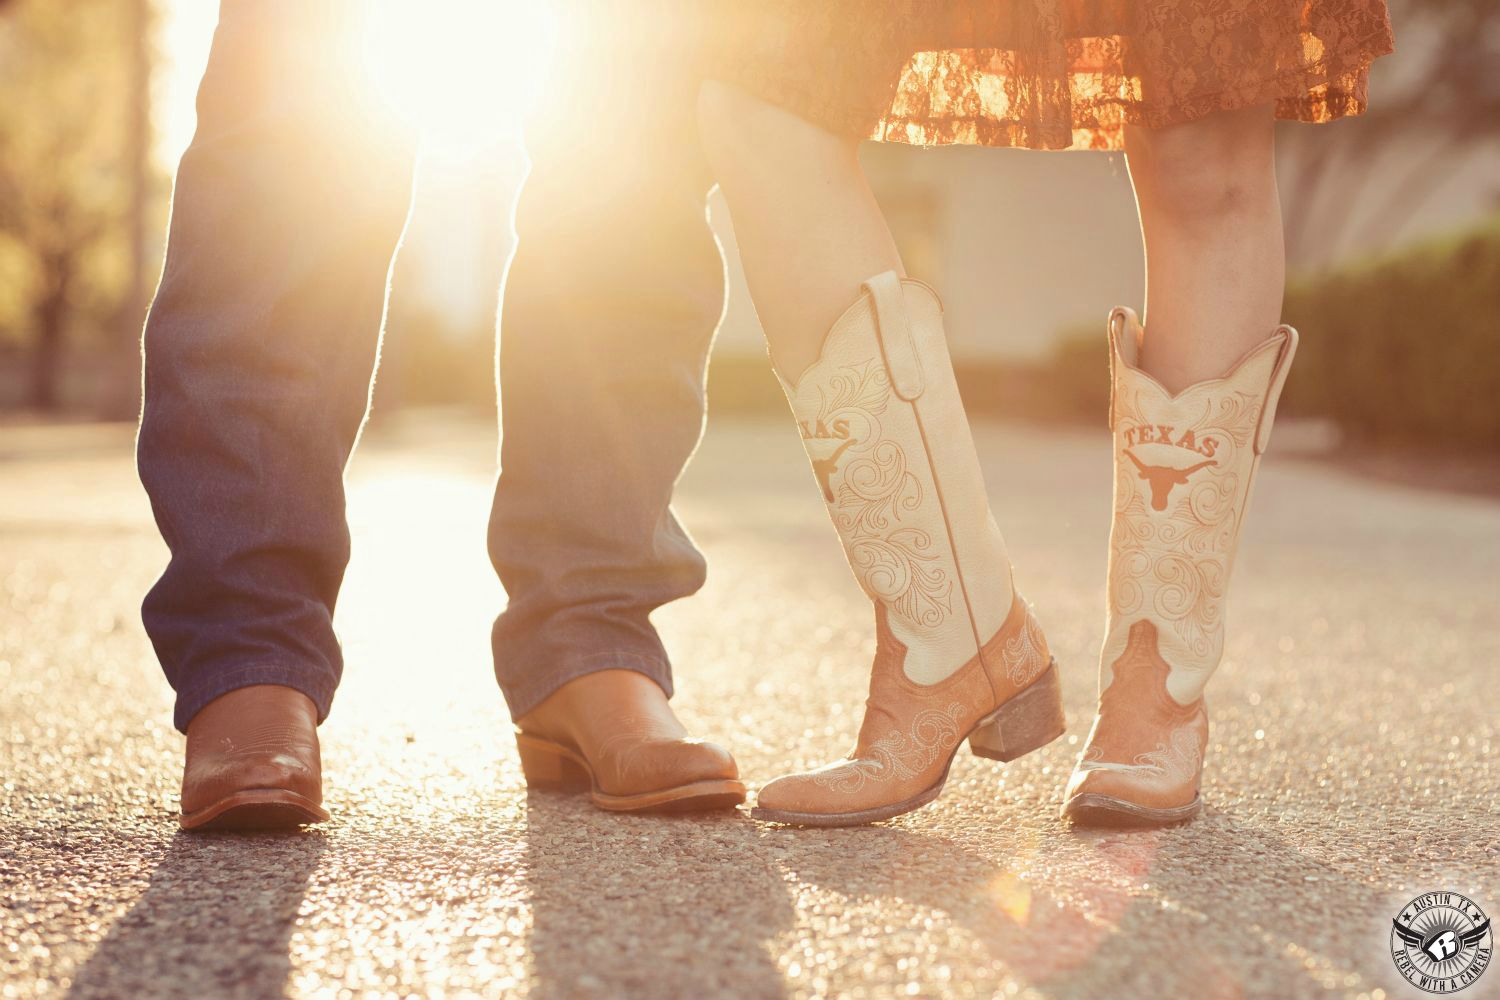 Two people stand in wearing an orange lacey dress and blue jeans with Texas Longhorn boots with Longhorn logo on an exposed aggregate side walk with the warm yellow orange sun shinning through their legs in this fun engagement photo in Austin, Texas.